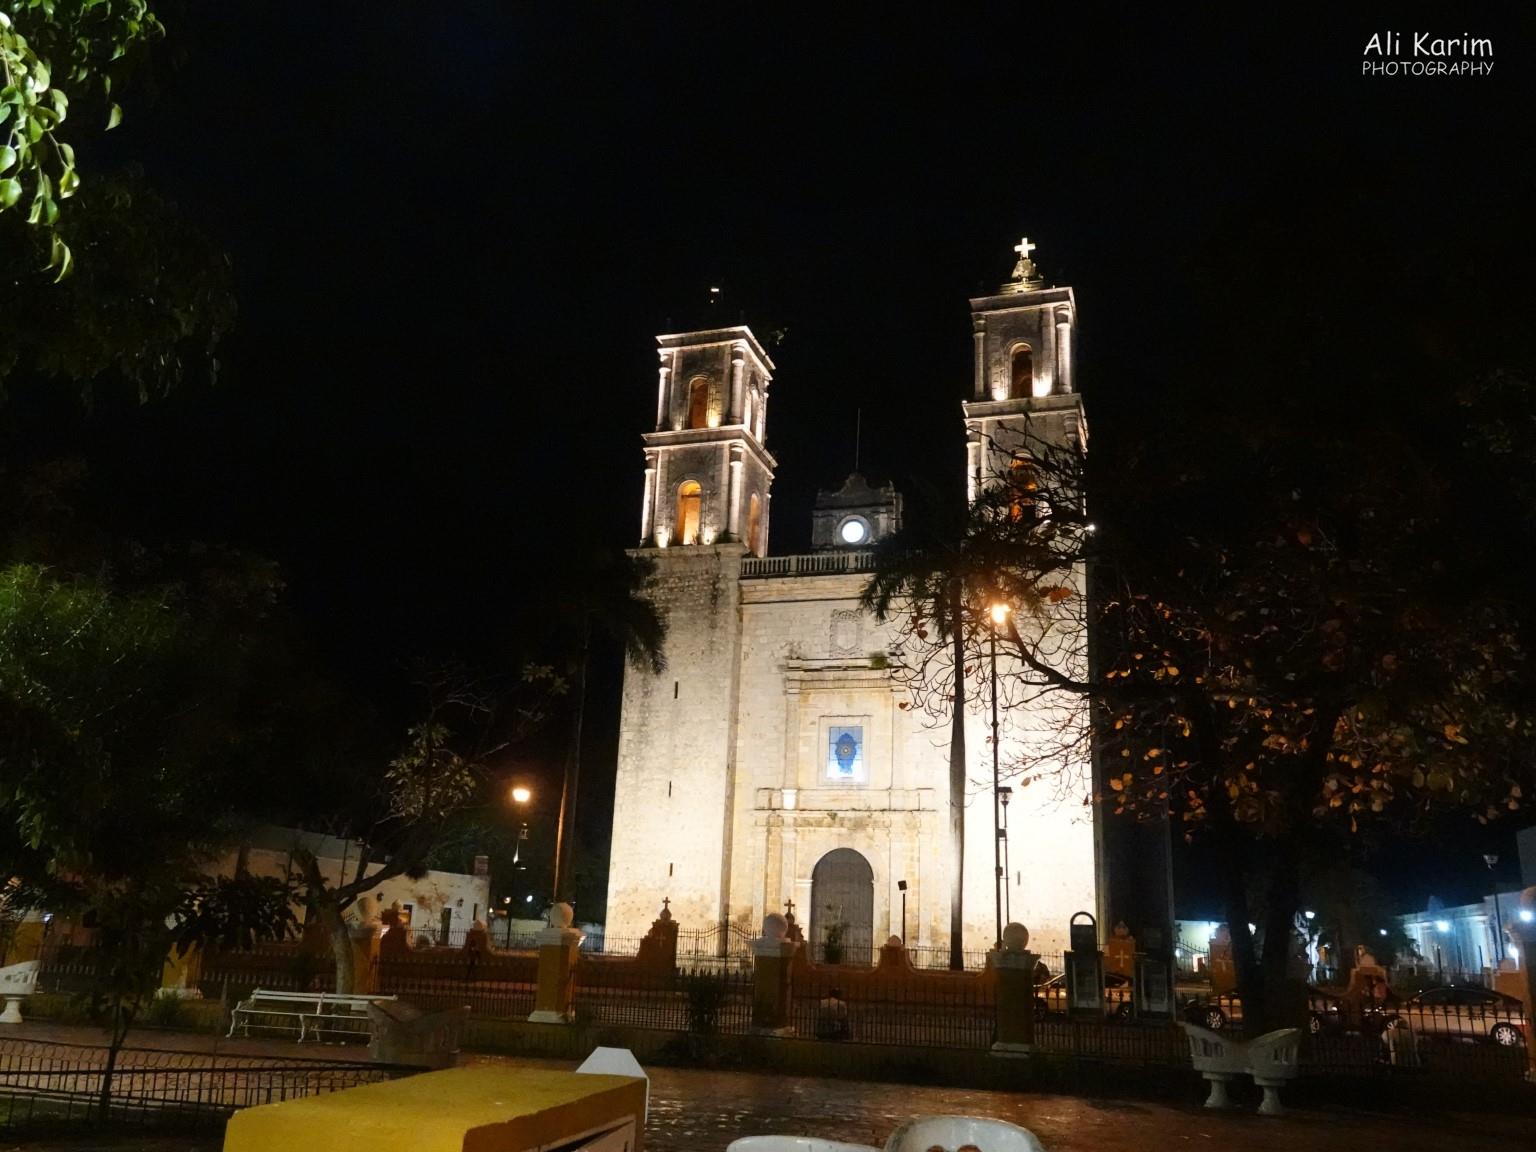 Valladolid, Yucatan, Mexico Feb 2021, Nicely lit of cathedral in the zocalo